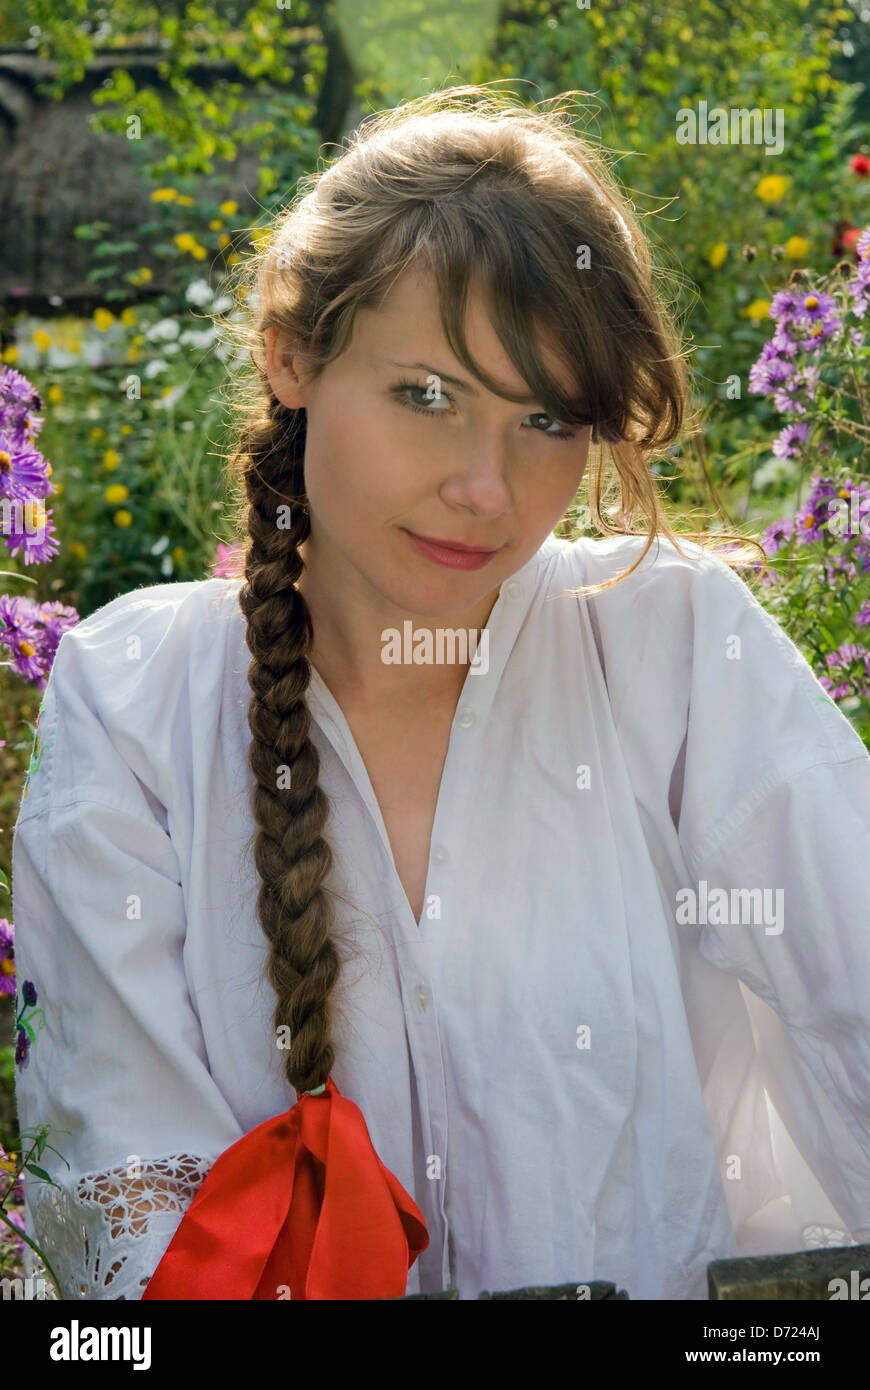 Portrait of young woman with long plait, close up Stock Photo